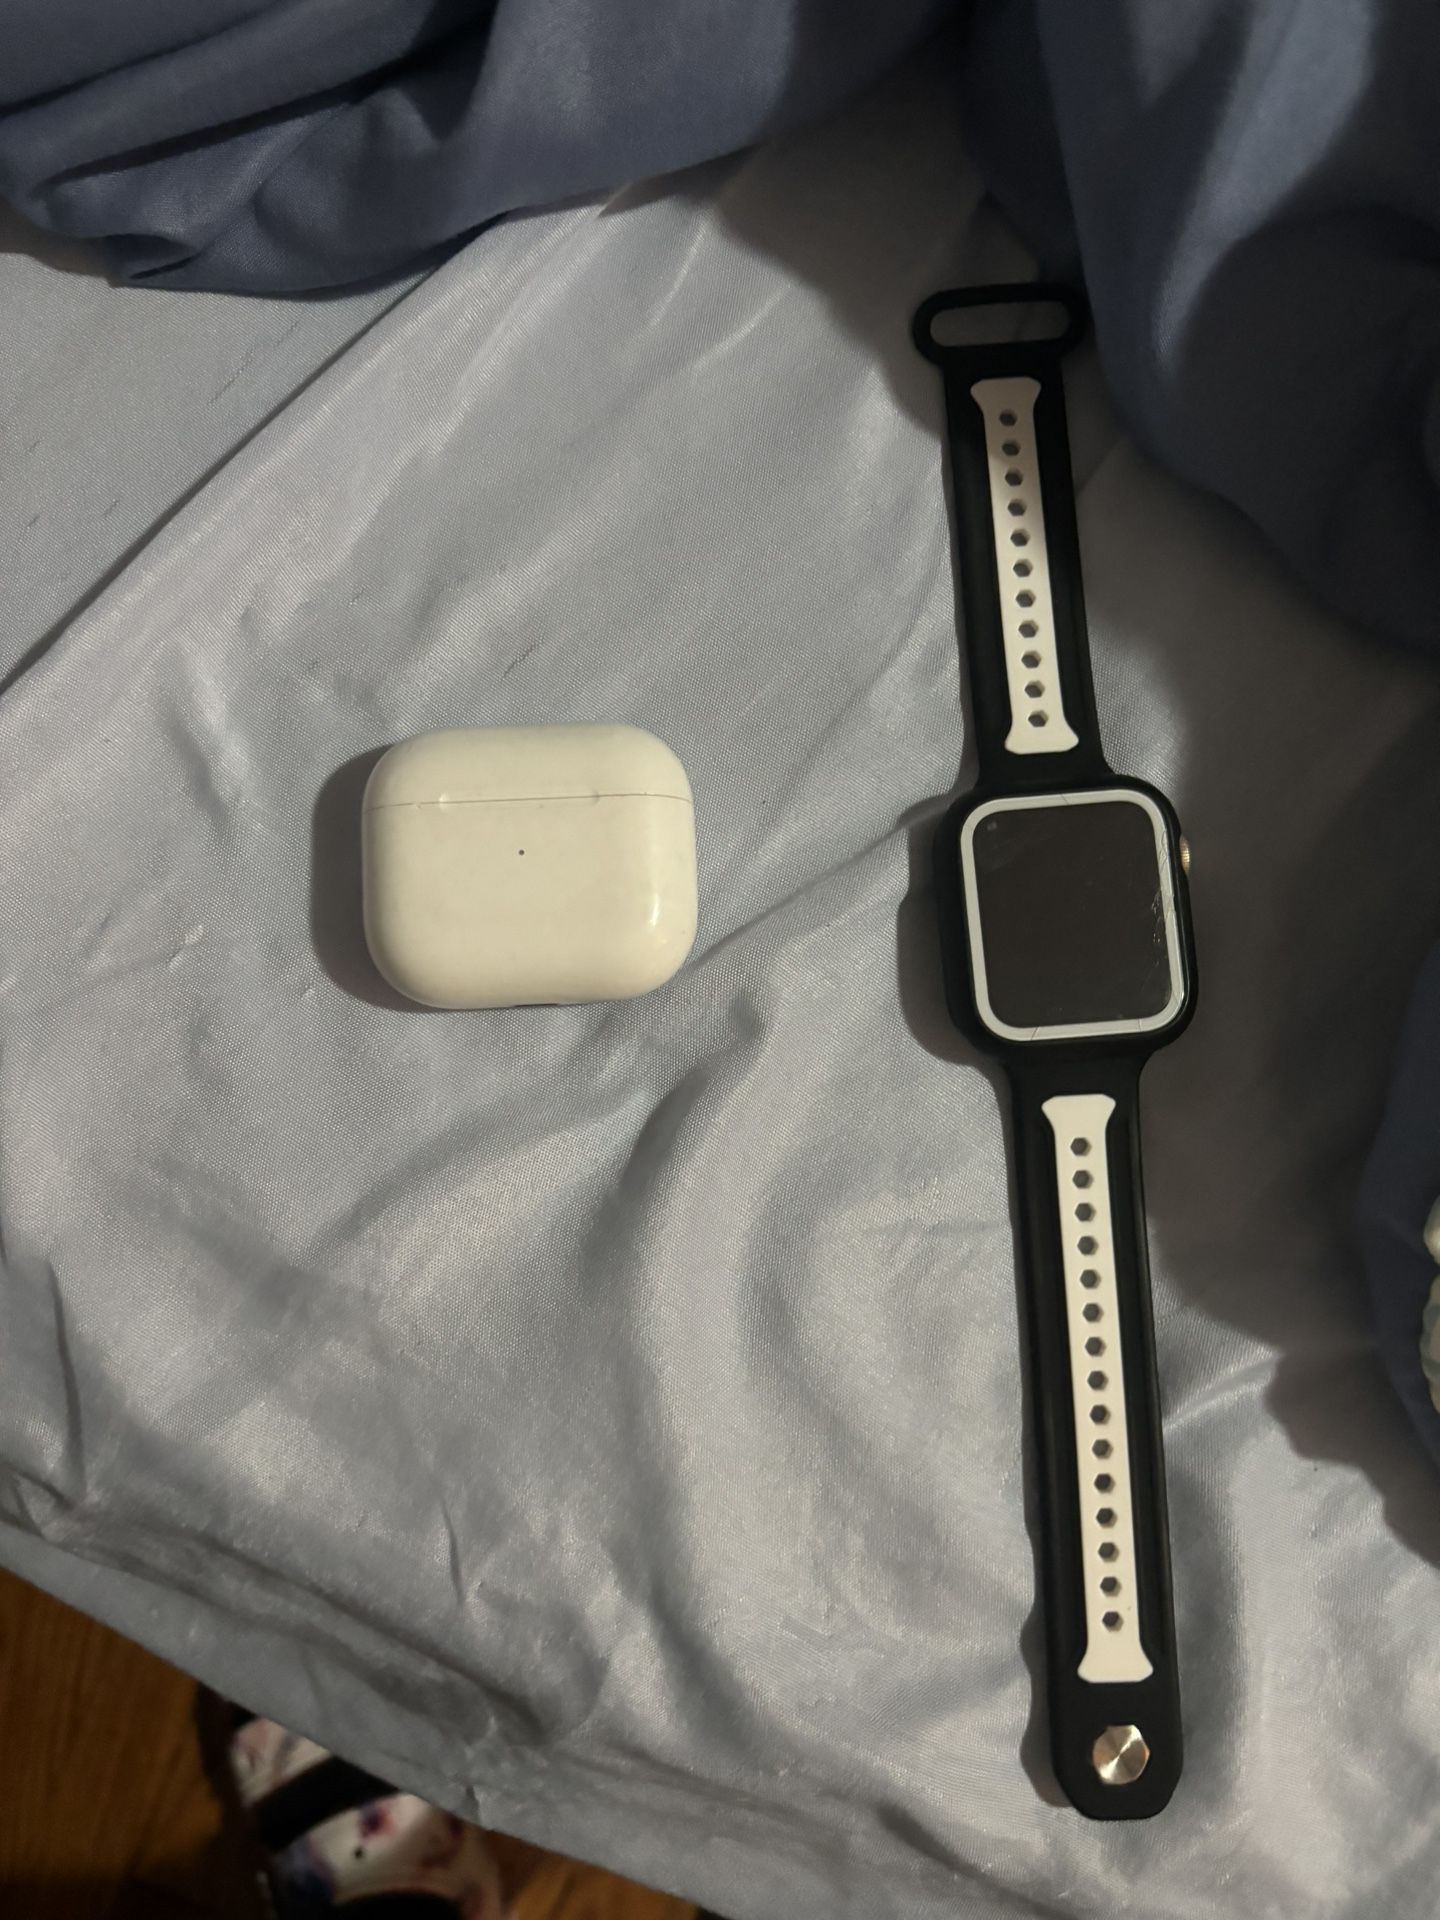 Apple Watch And AirPods